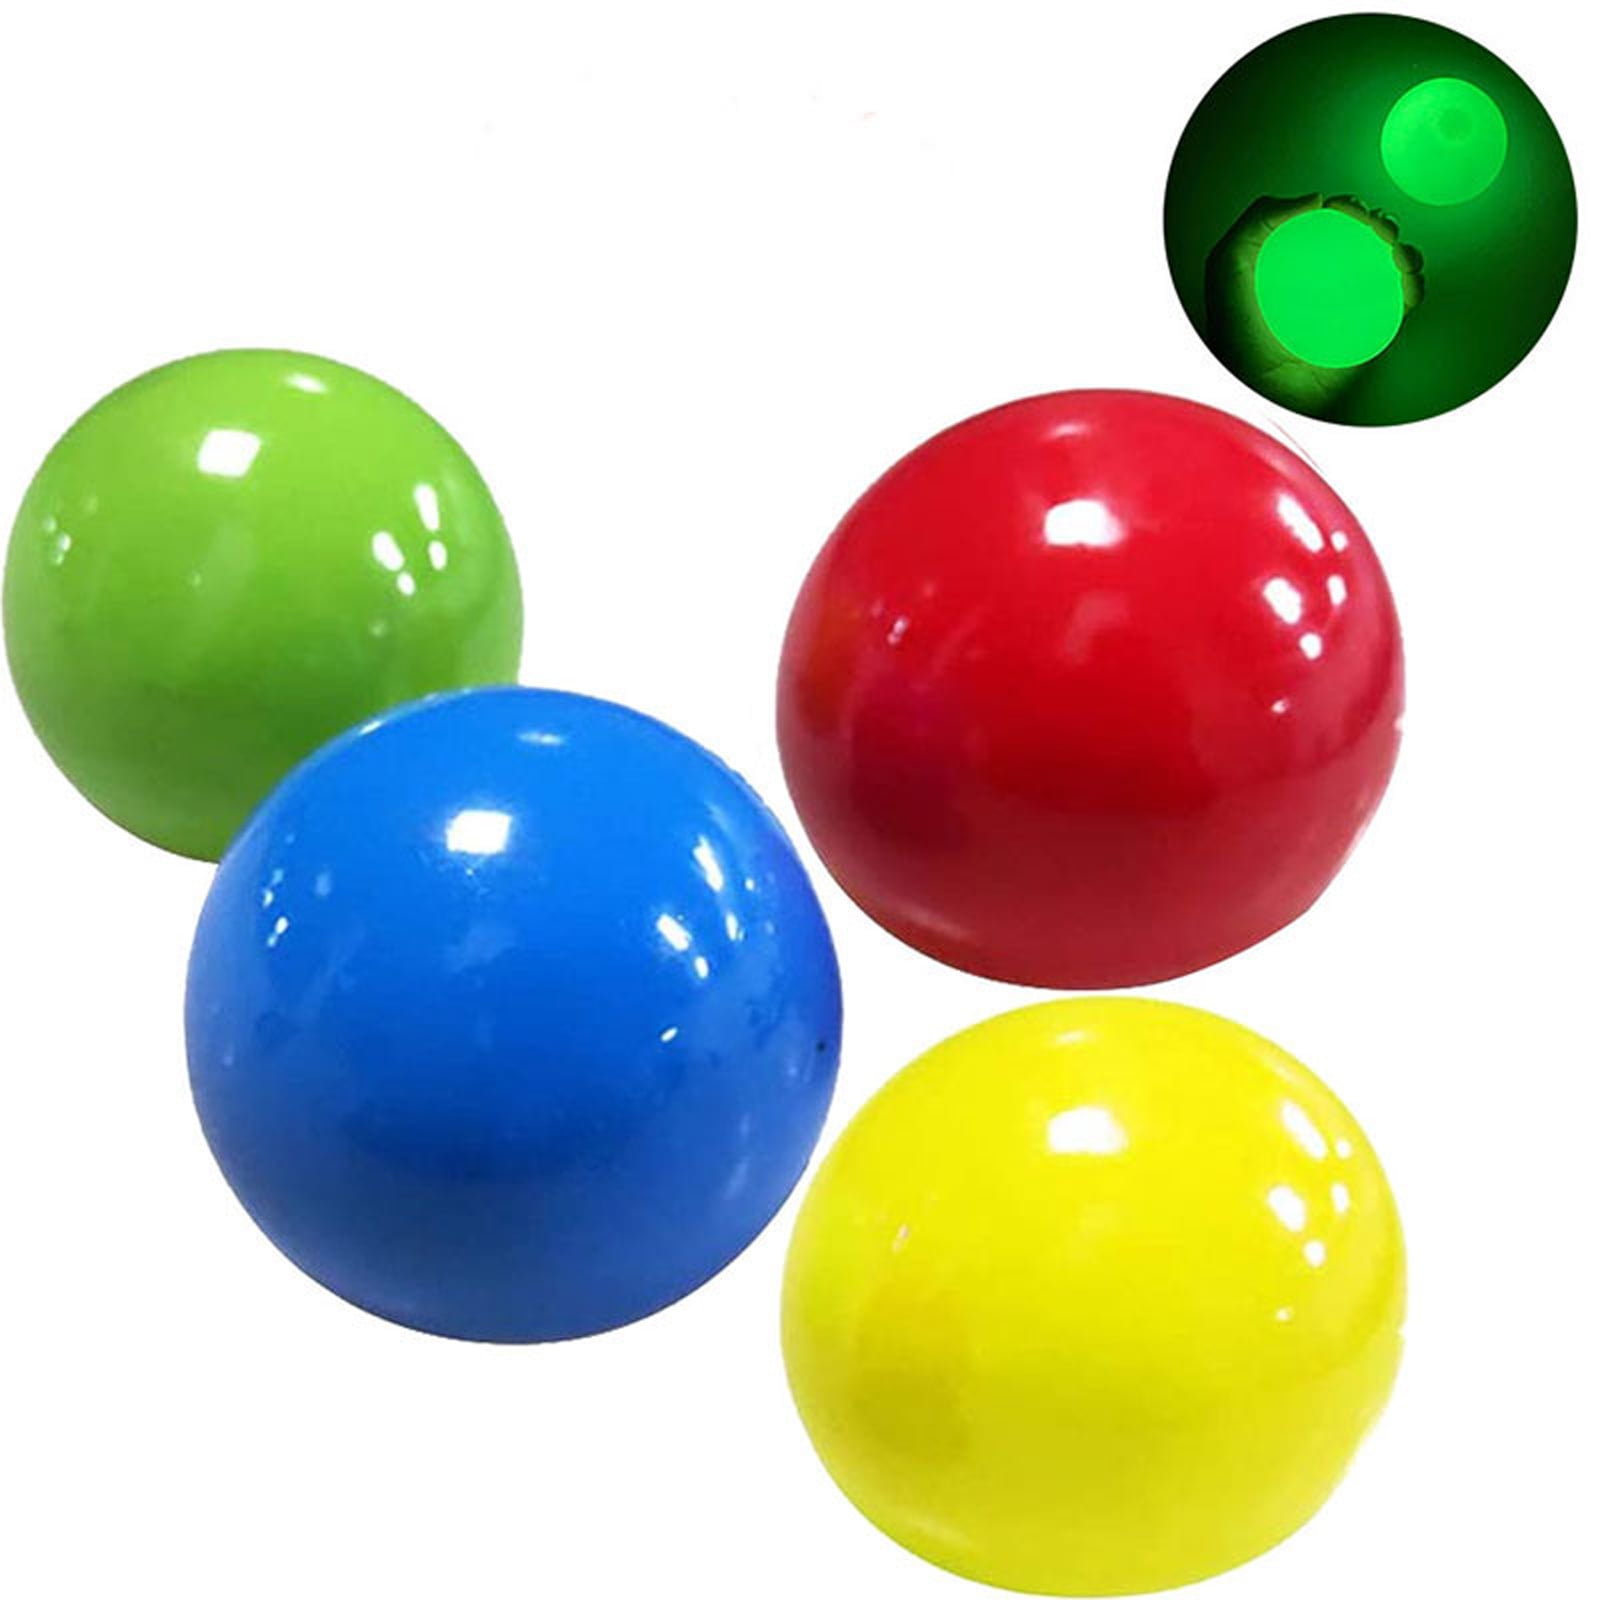 Wash Before Using Luminescent Stress Relief Balls Stick to The Wall and Slowly Fall Off Pressure Anxiety Relief Toys for Both Kids & Adults 4pcs Fluorescent Sticky Balls